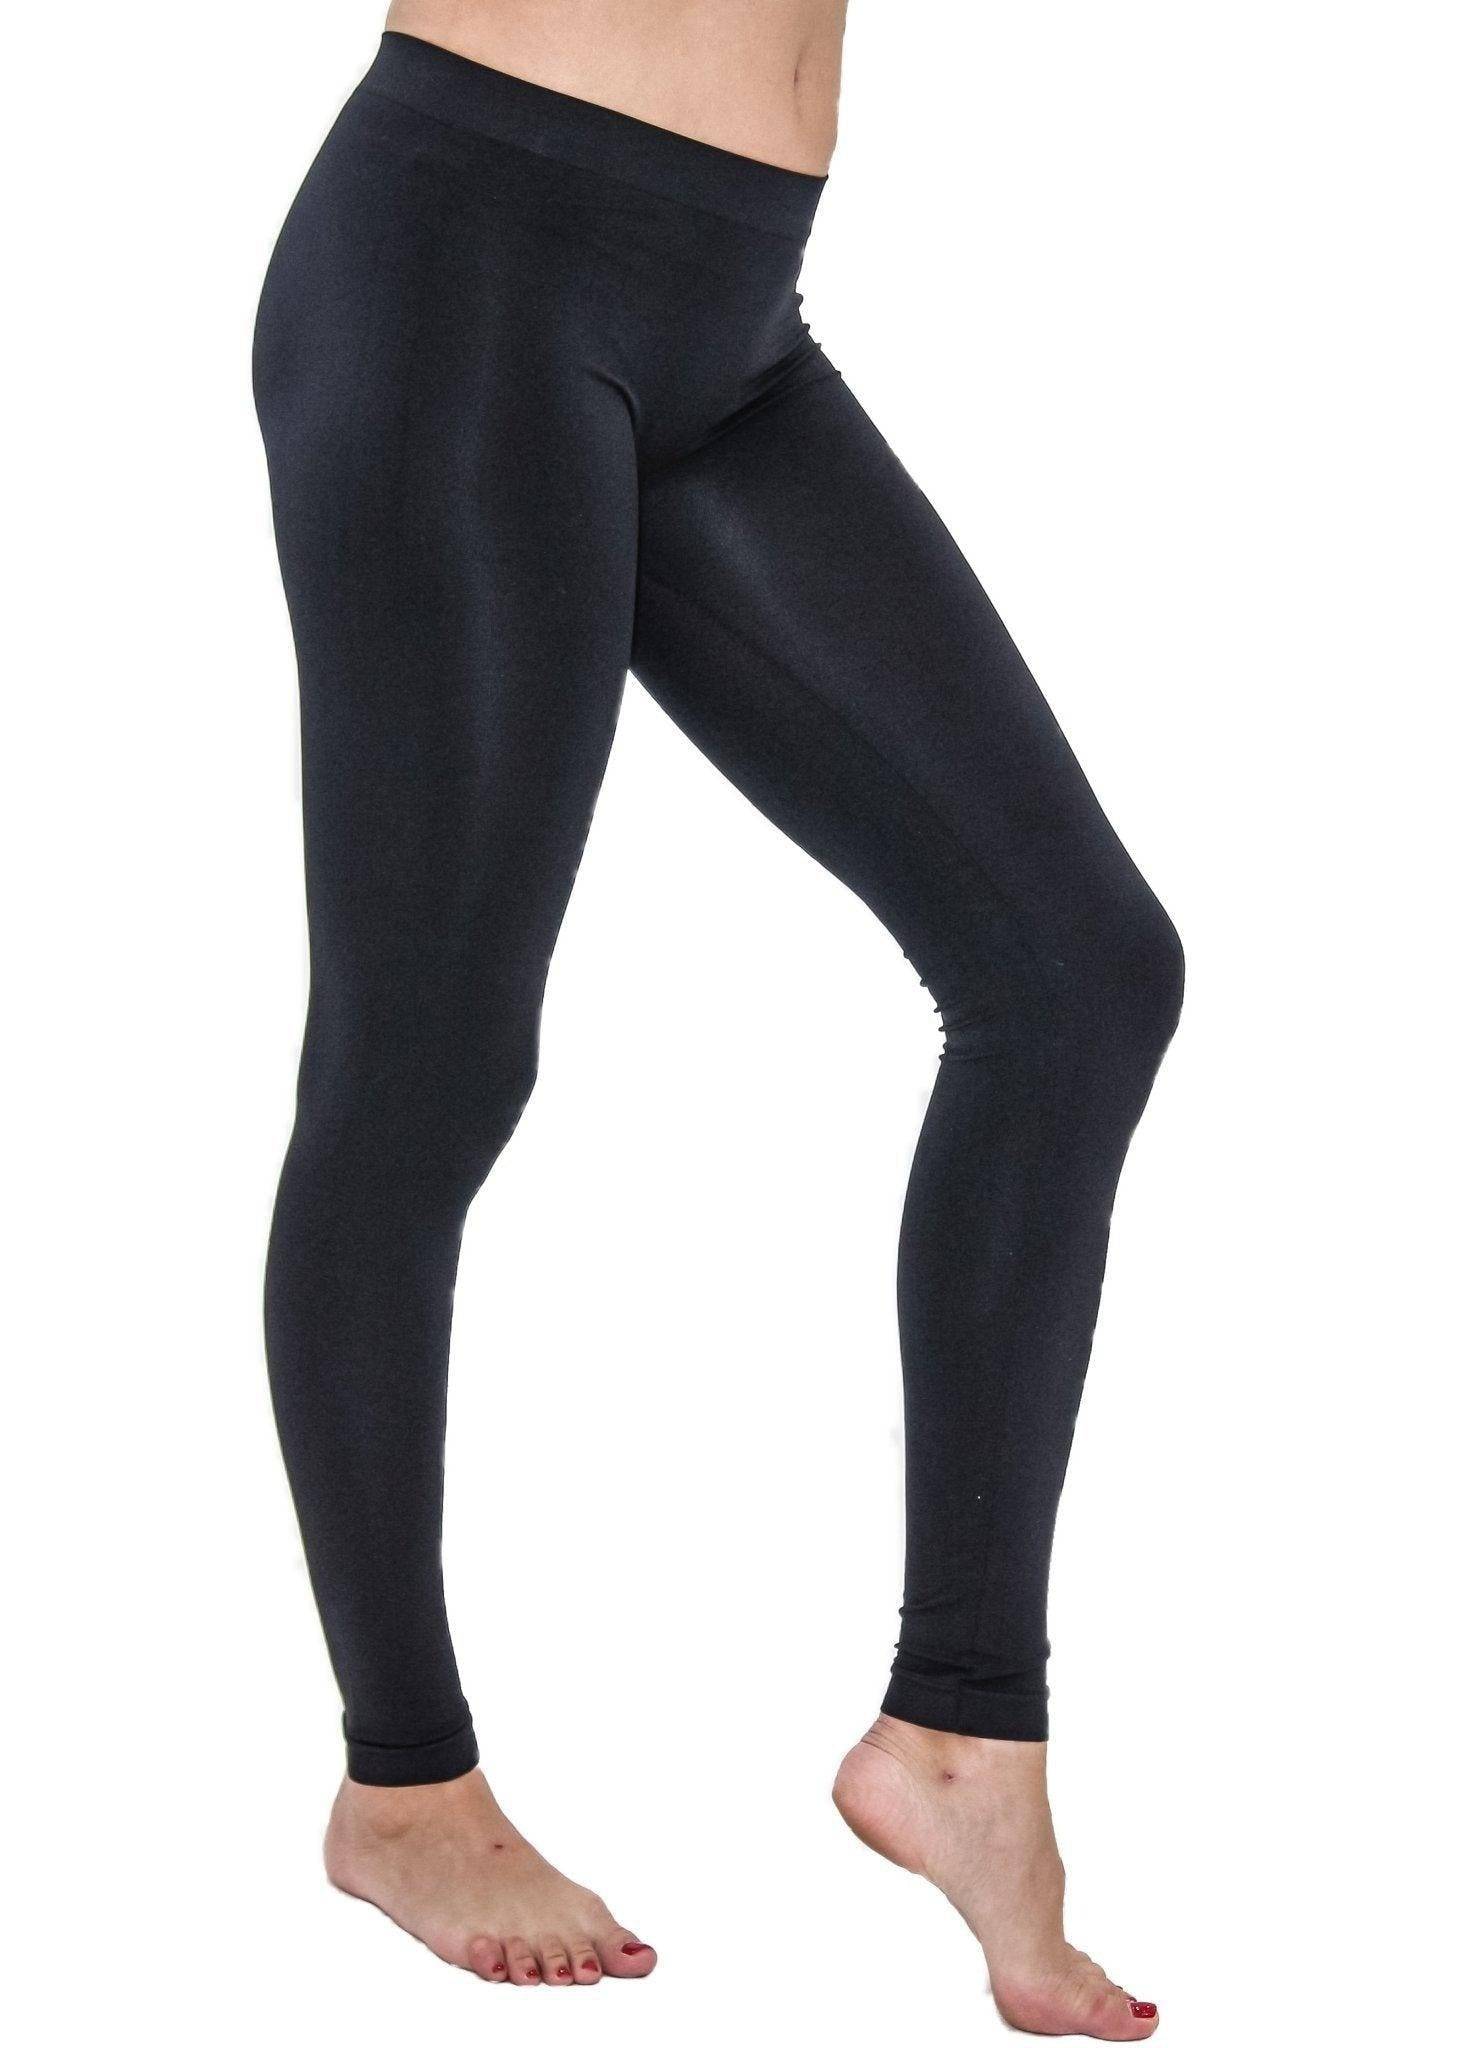  FULLSOFT Soft Leggings For Women - High Waisted Tummy  Control No See Through Workout Yoga Pants(Black,Navy Blue